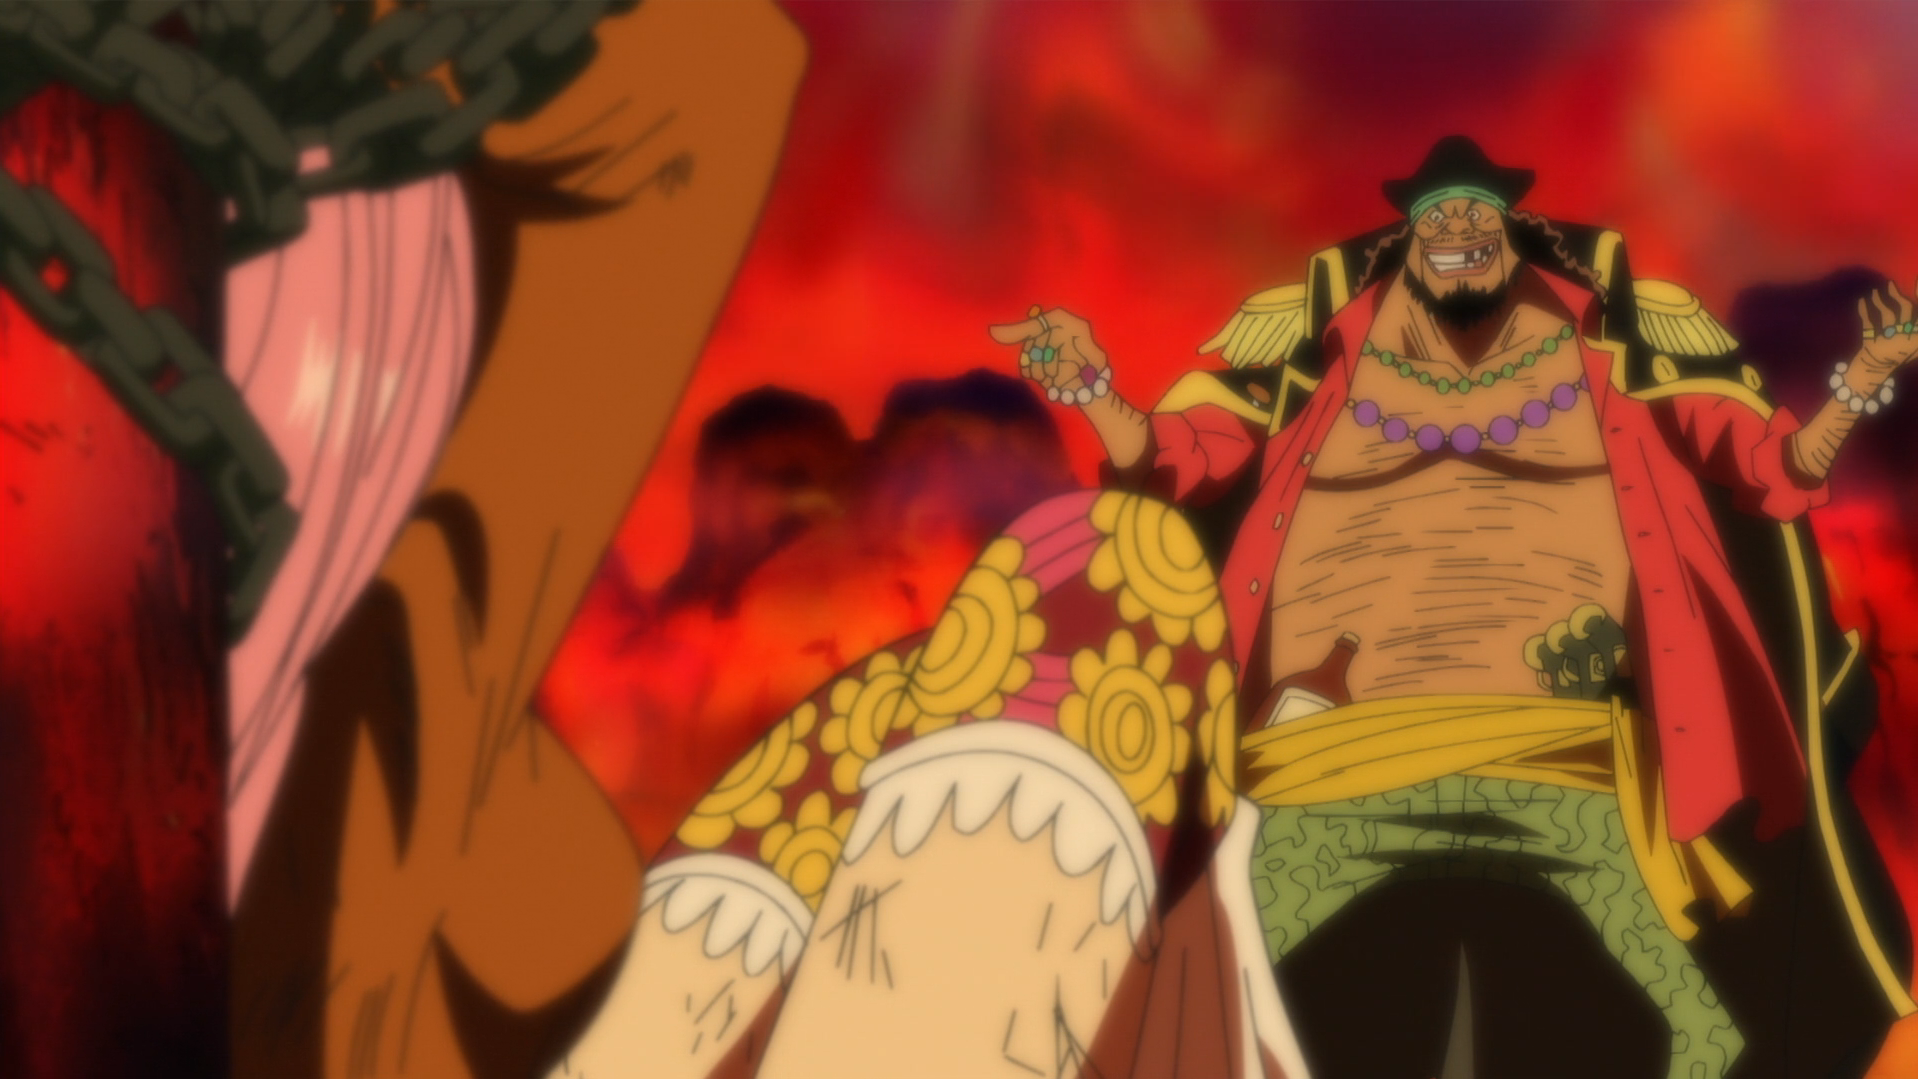 One Piece episode 1062: King's past is revealed as Zoro finds his weakness  and emerges victorious